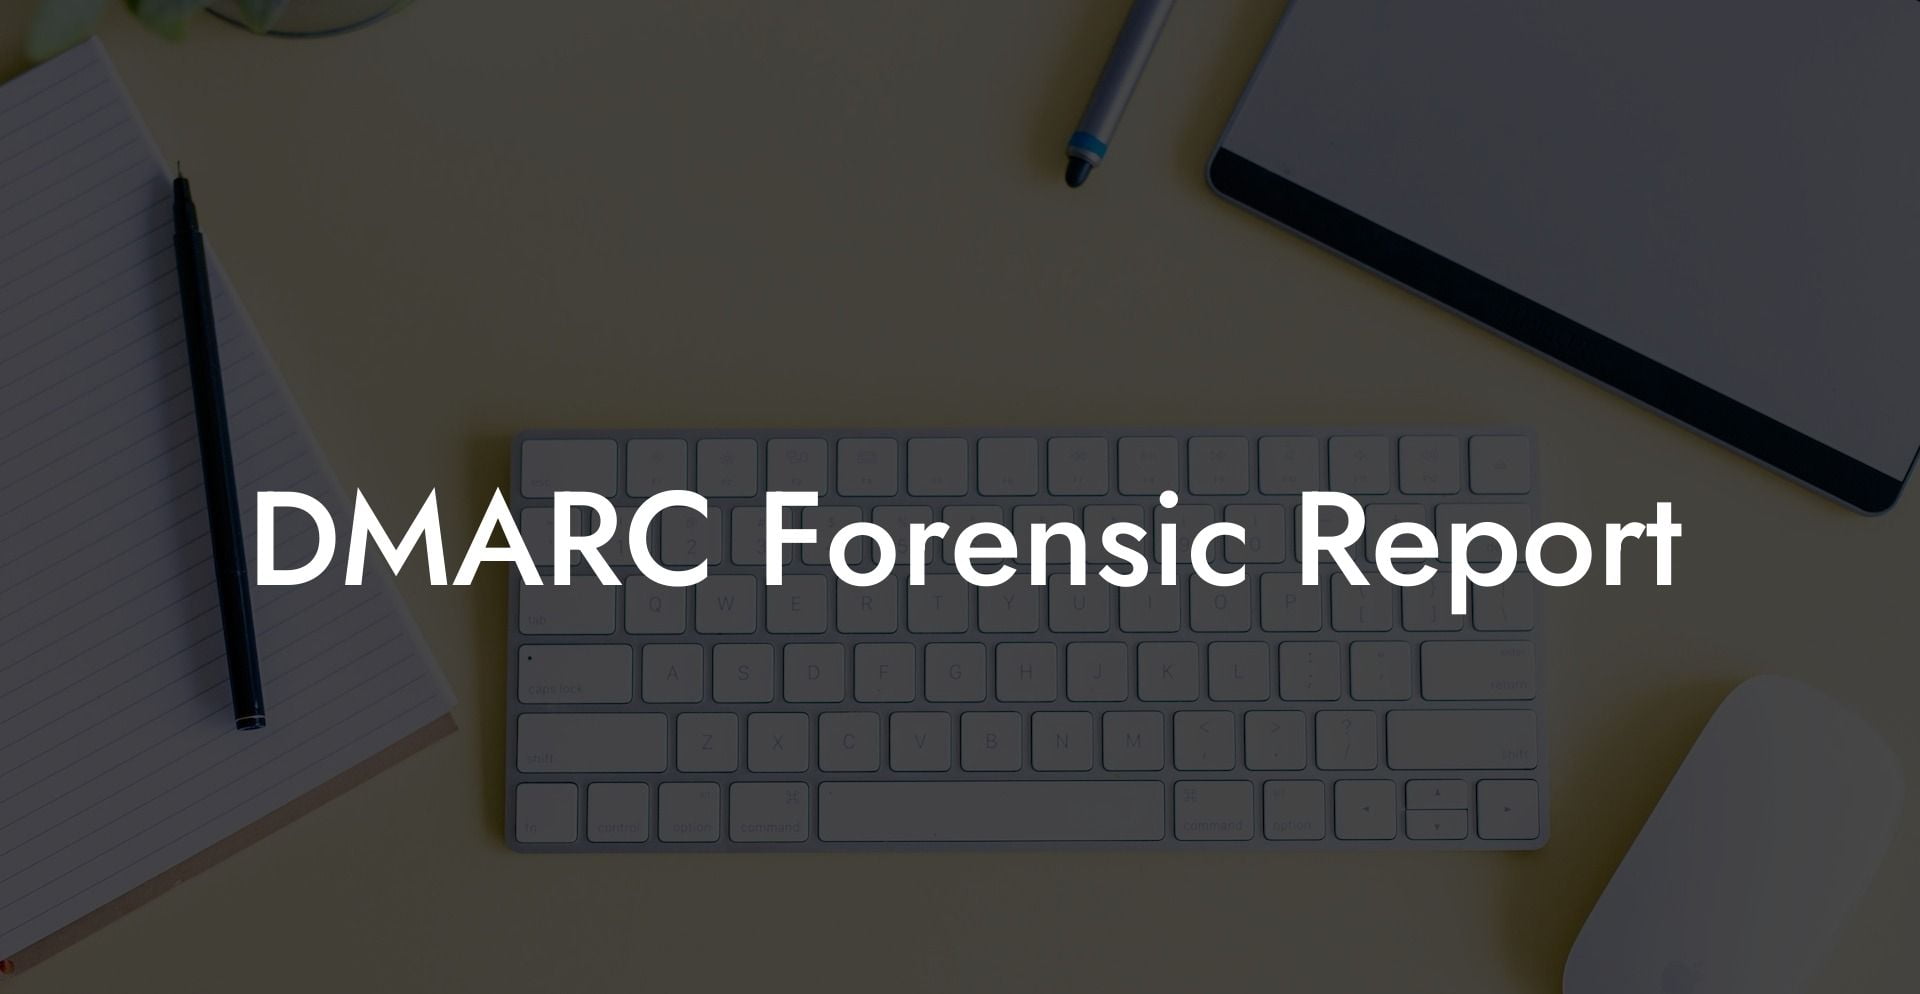 DMARC Forensic Report